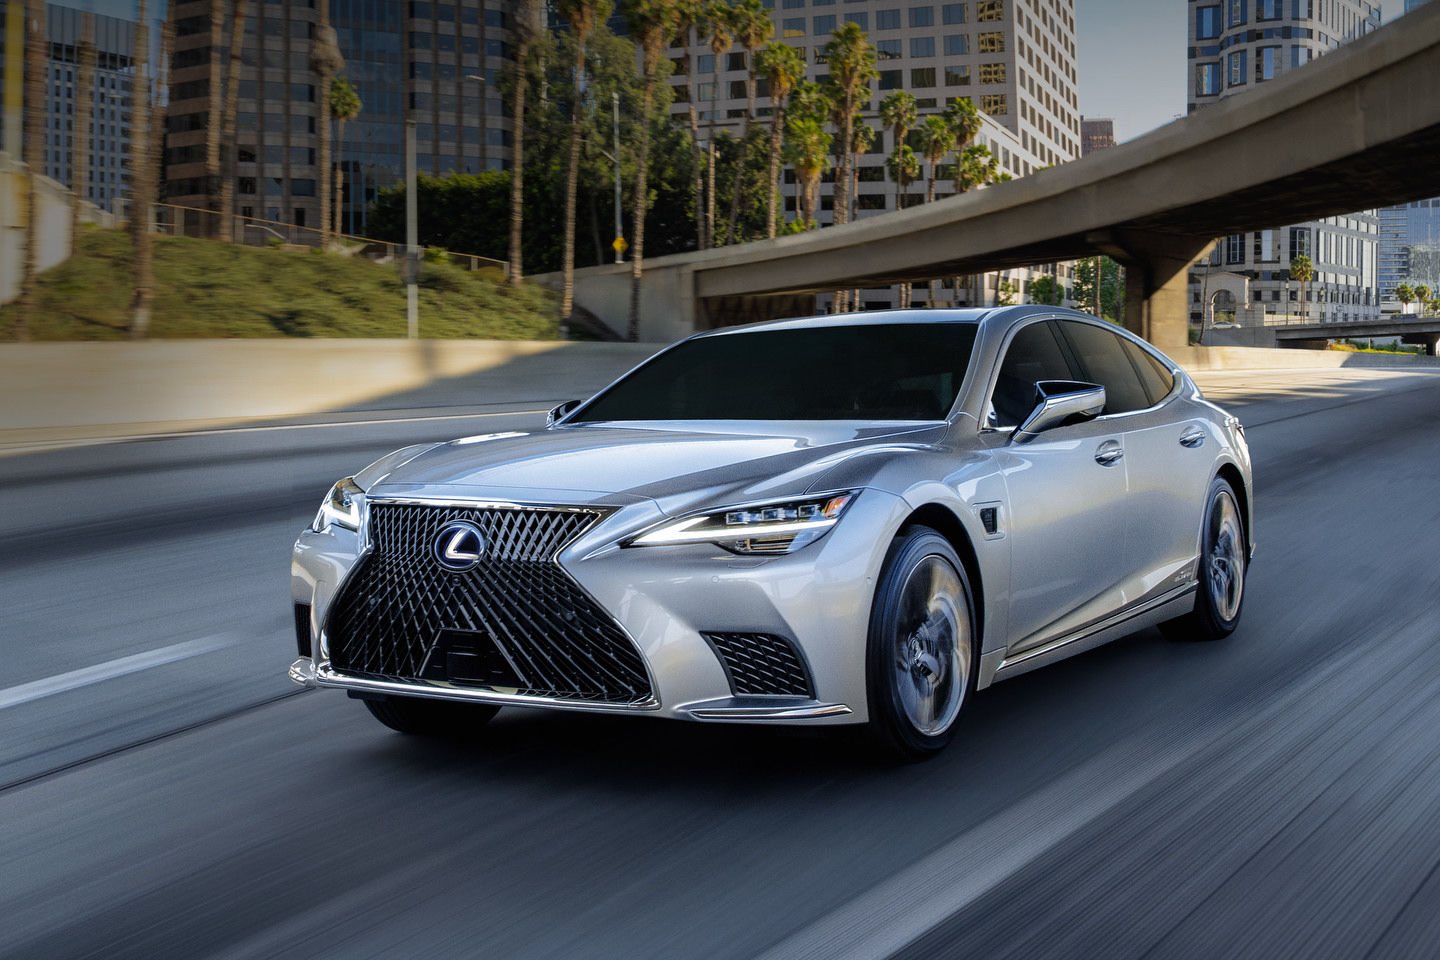 Lexus Adaptive Variable Suspension: A Smooth Ride Like No Other